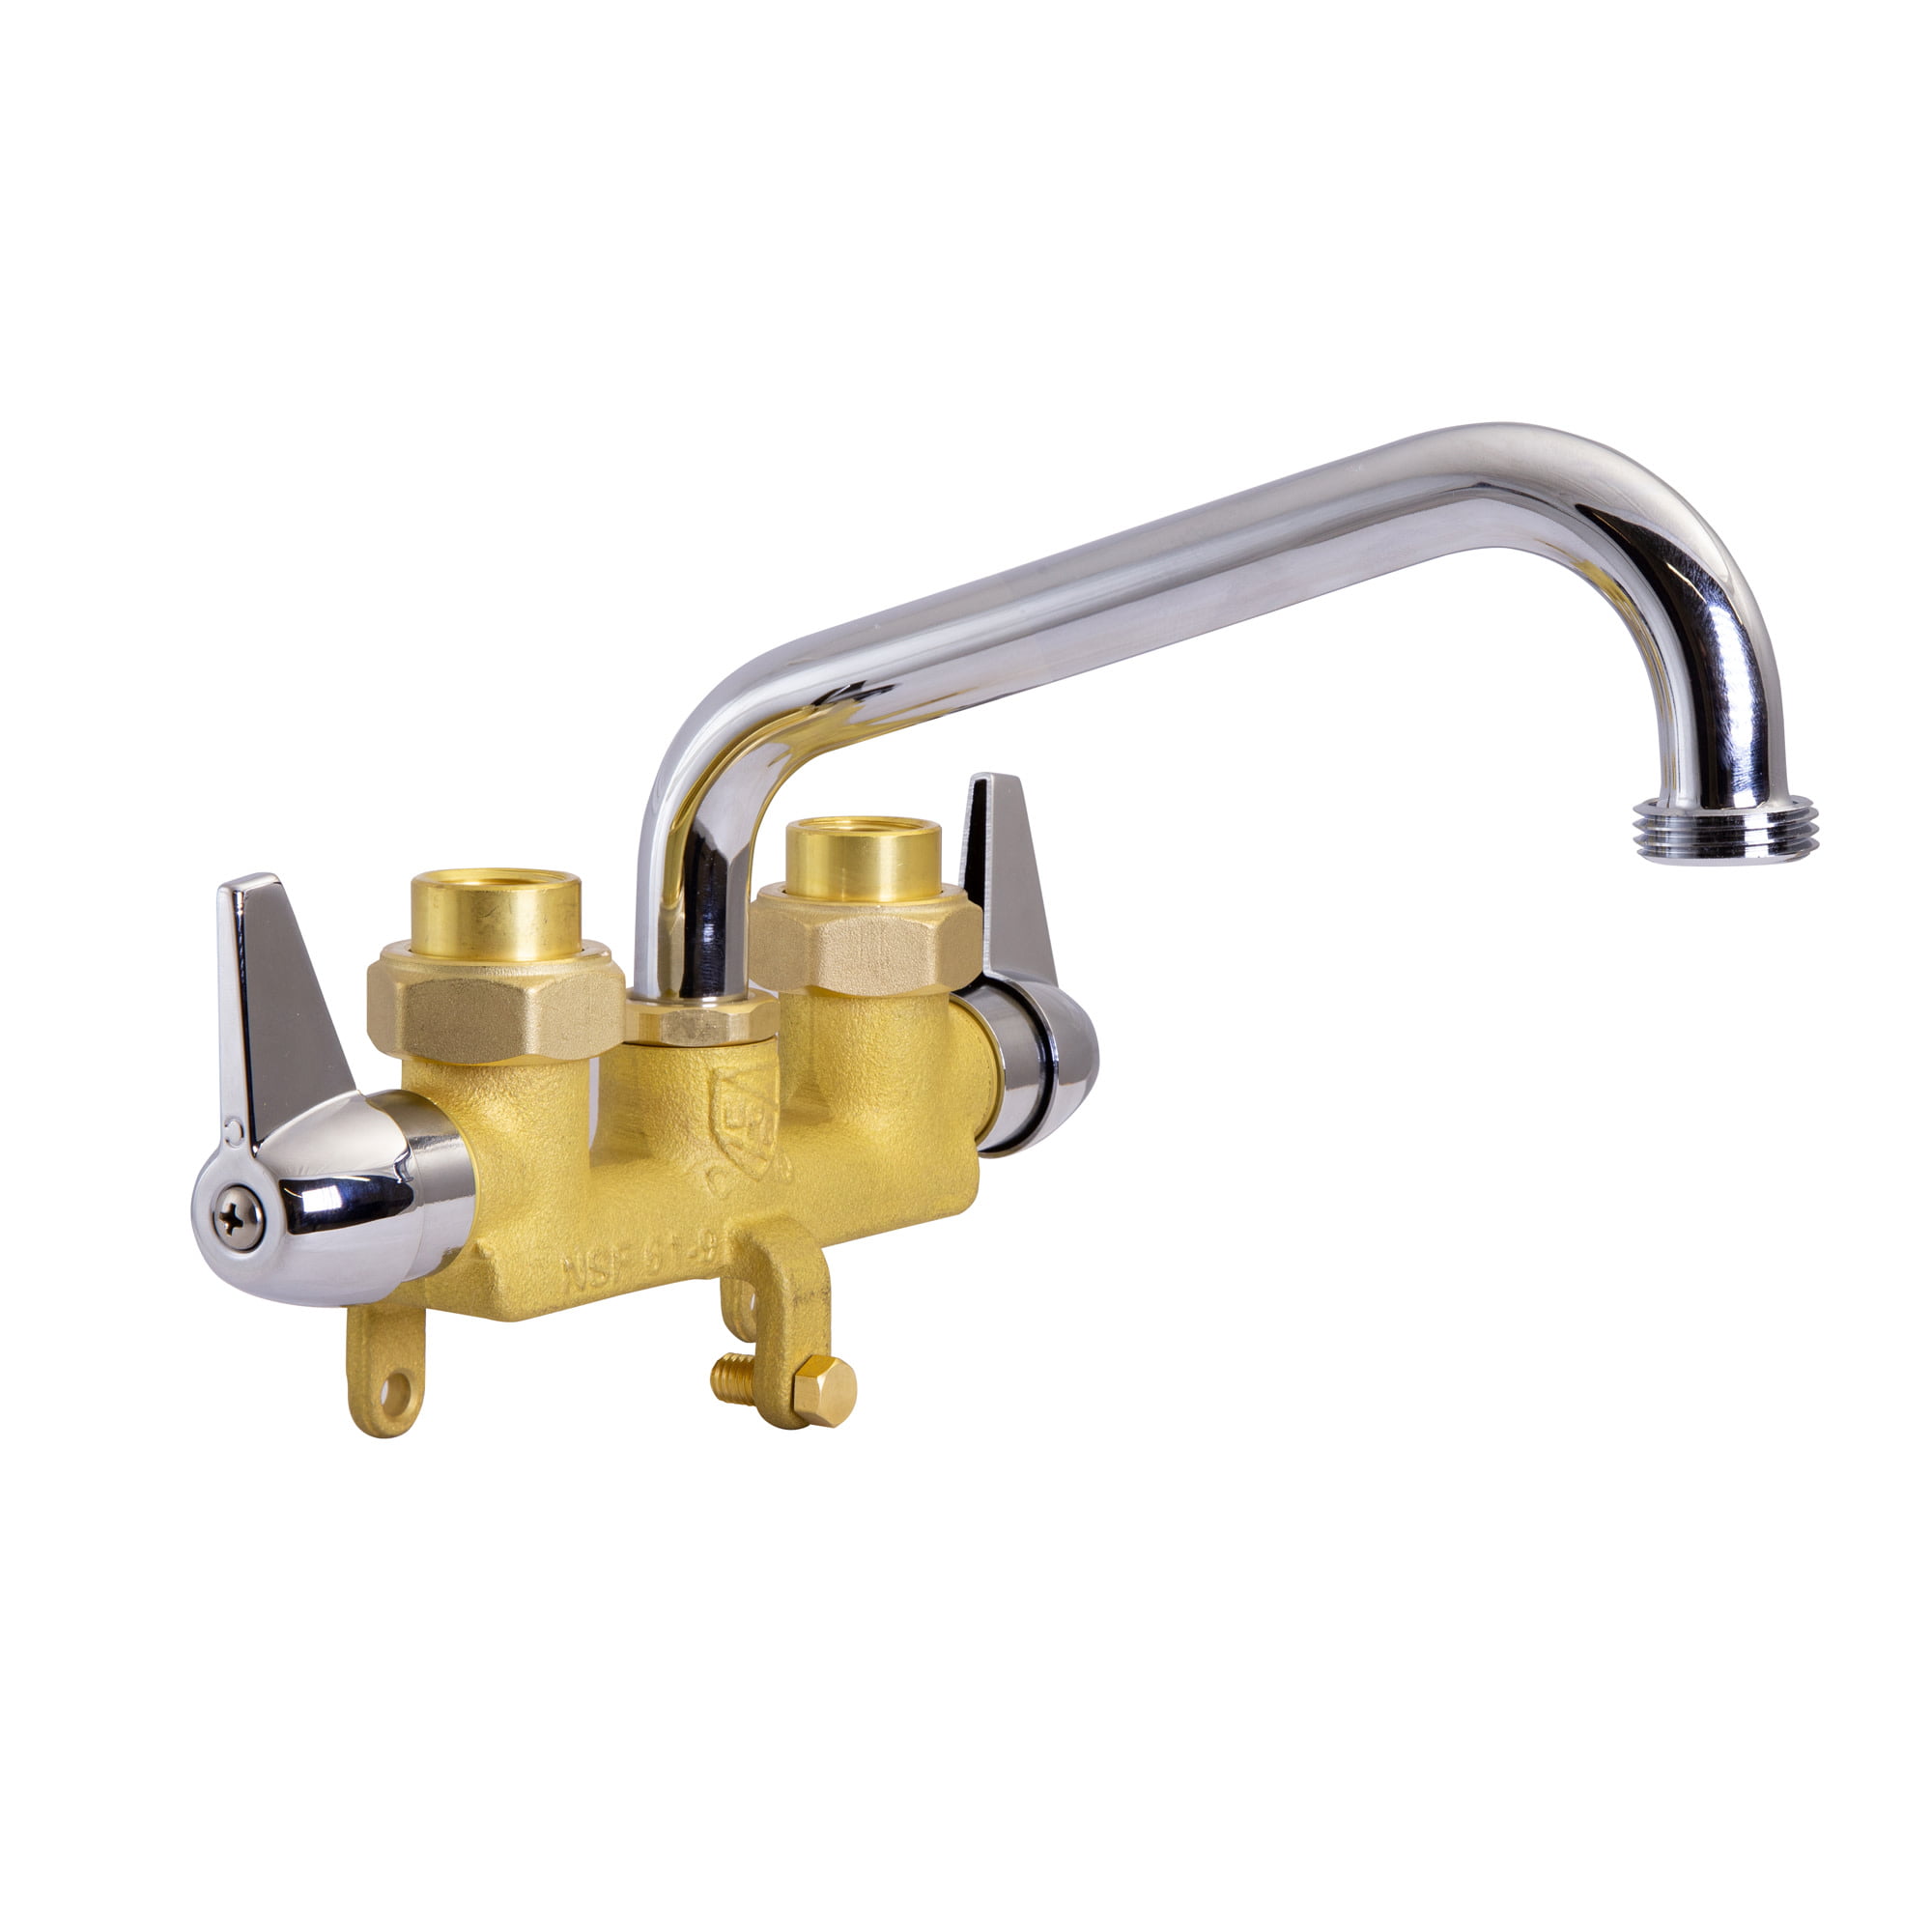 Rough Brass Homewerks 3310-250-RB-B Two-Handle Laundry Tray Faucet 